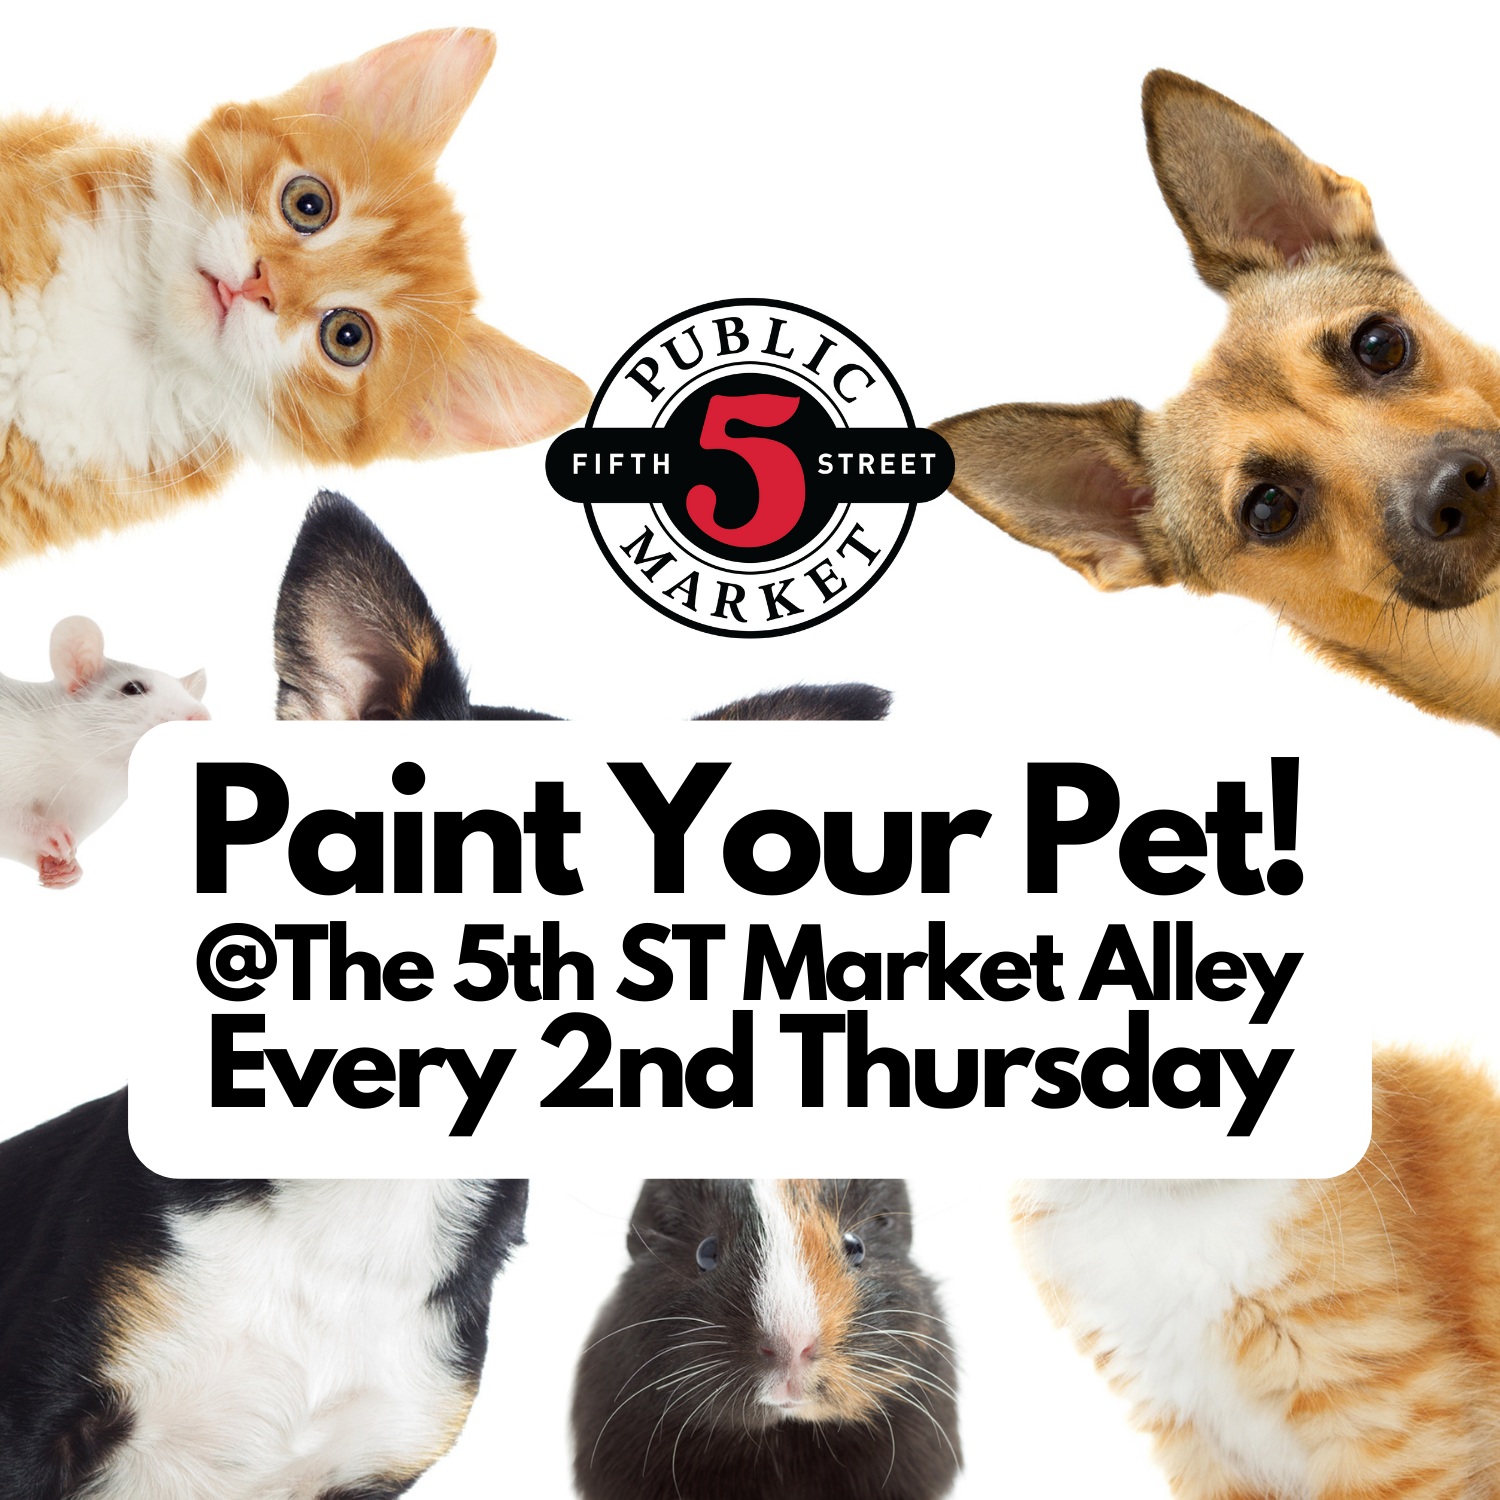 ​🐾🎨 Paint-Your-Pet Night at 5th St Market Alley 🎨🐾6:30-9ish